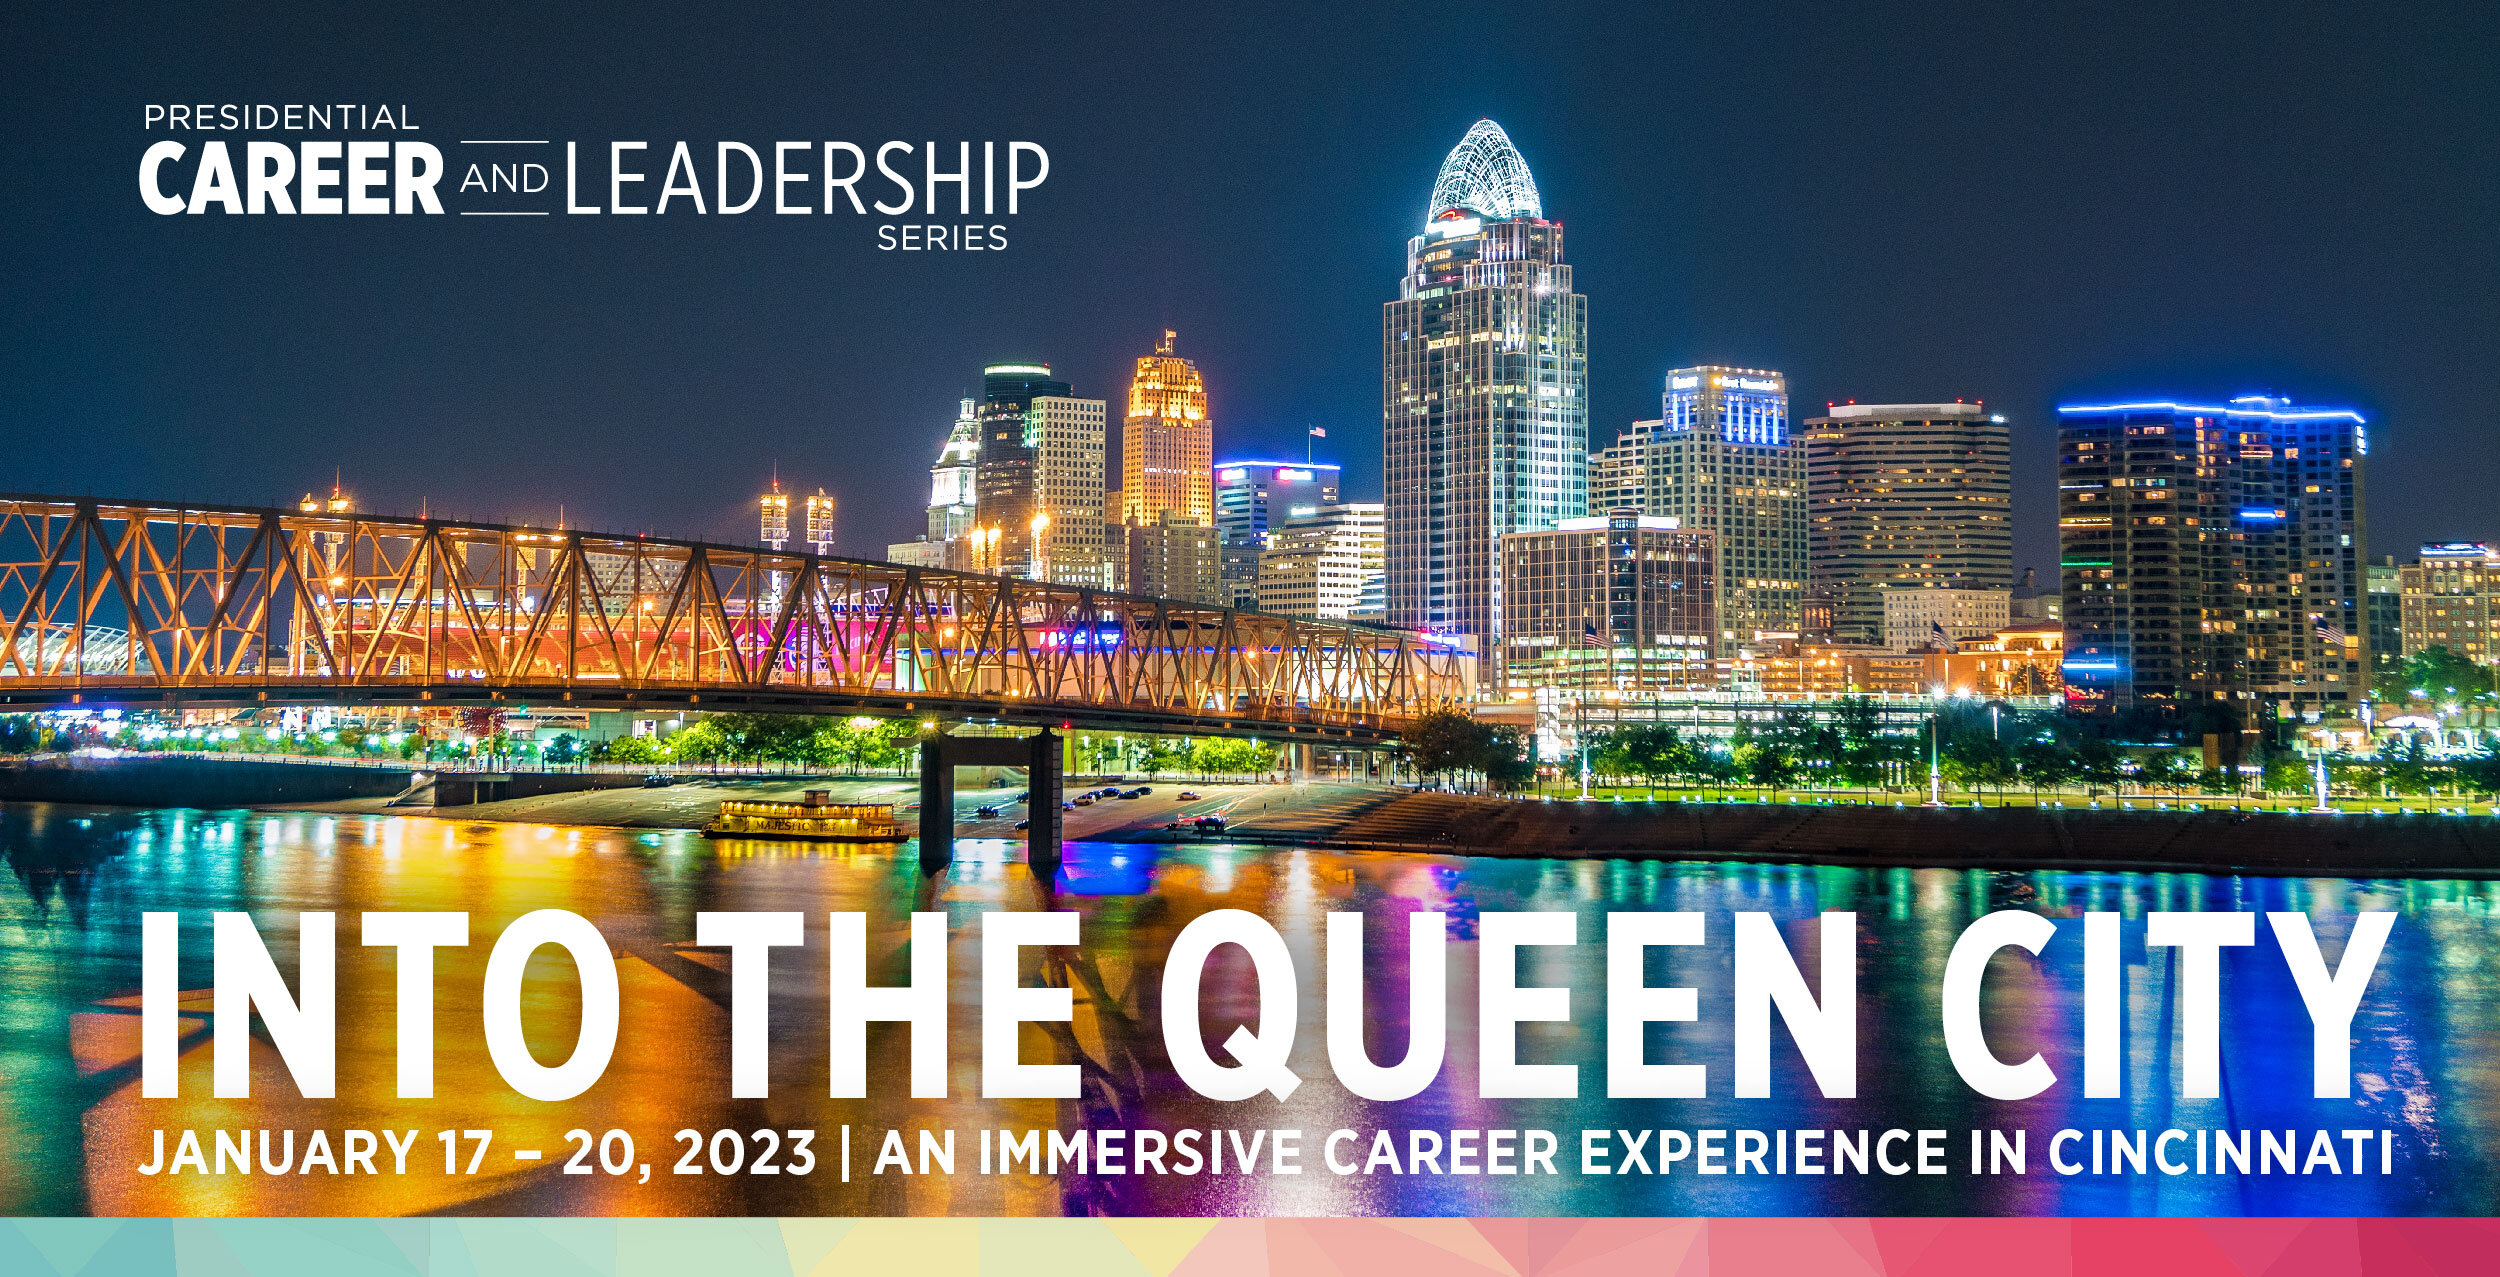 A graphic reading "Into the Queen City. January 17-20, 2023. An immersive career experience in Cincinnati." Pictures the Queen City at night.